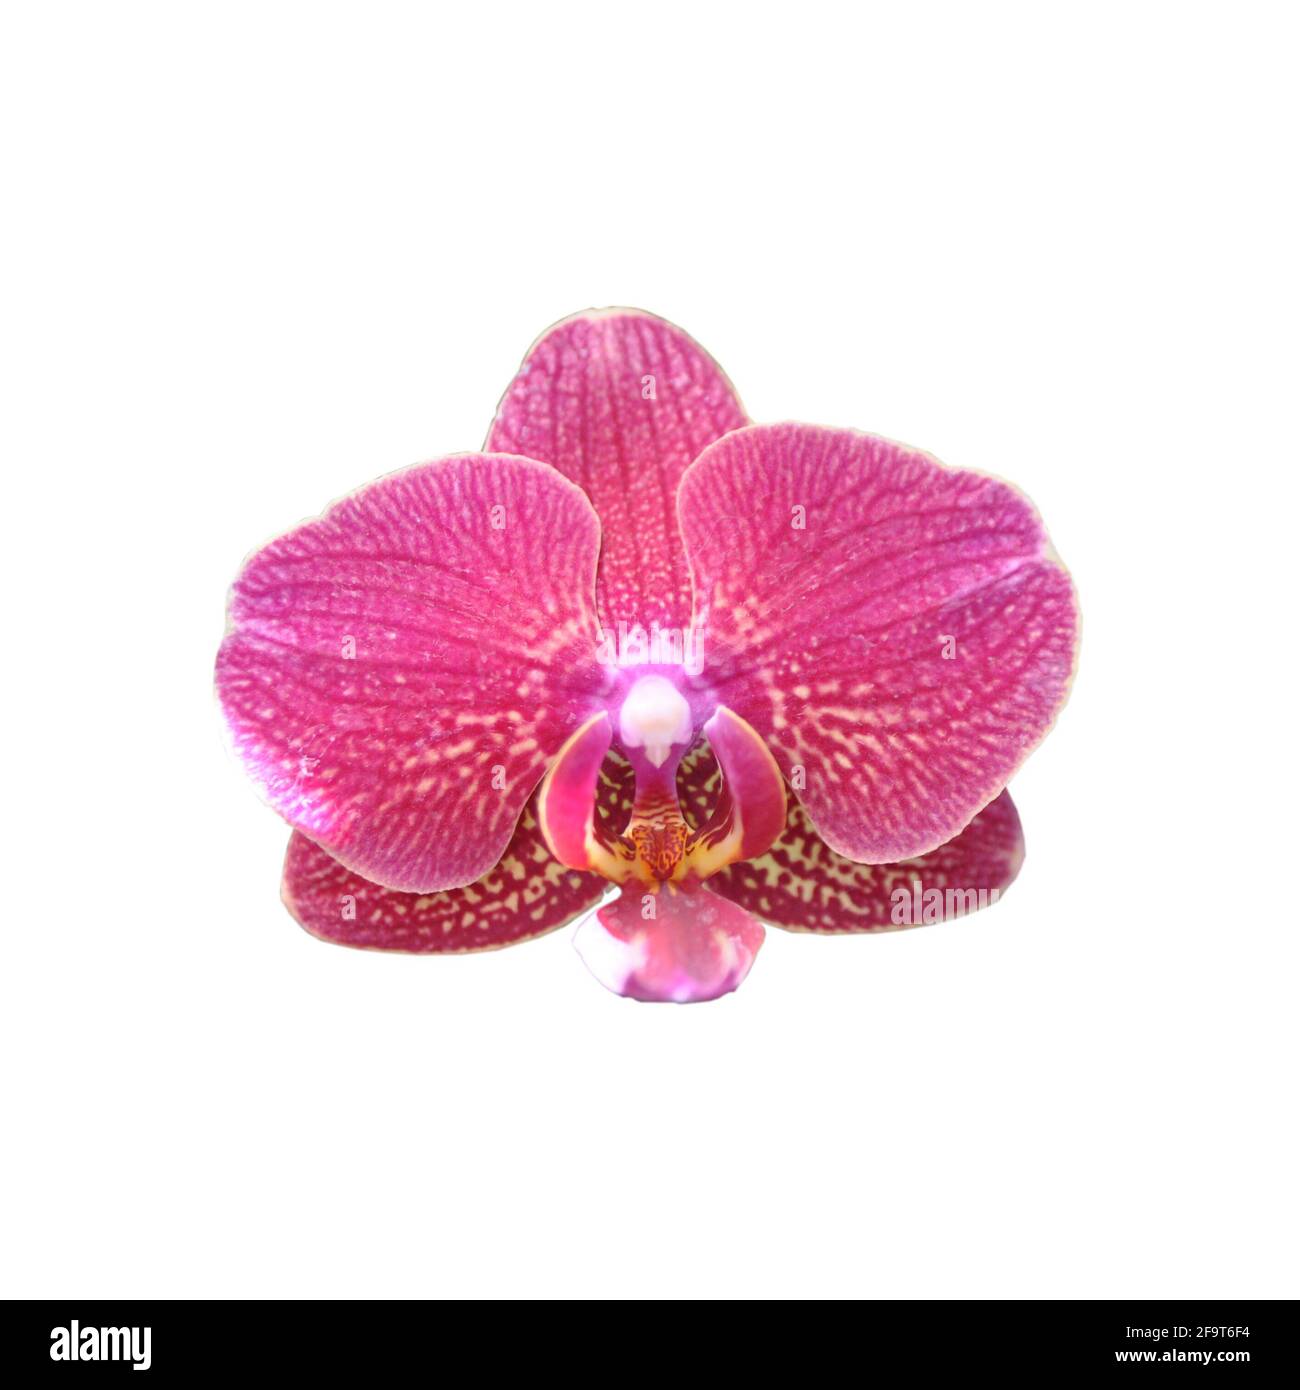 Burgundy speckled orchid flower isolated on white background. Stock Photo